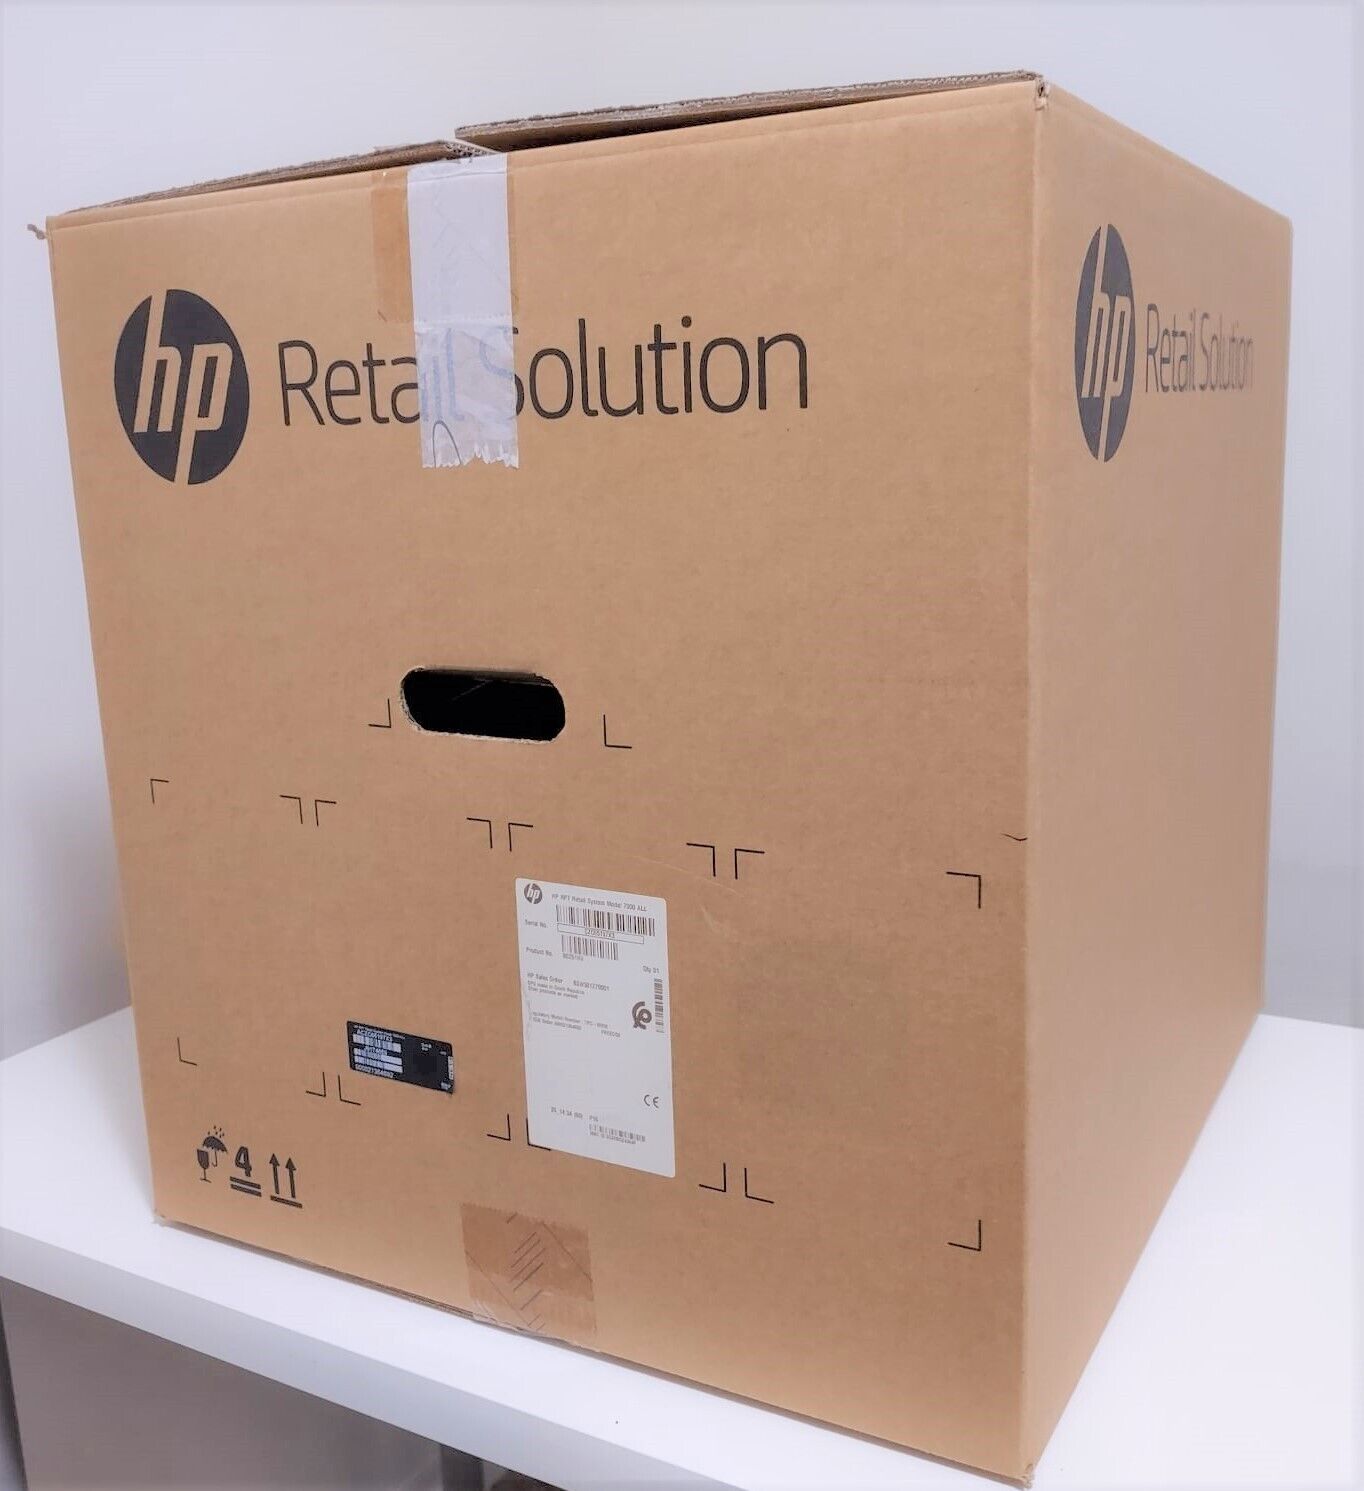 HP RP7 Retail System 7800 - all-in-one - Core i3 2120 3.3 GHz - vPro - 4 GB - HDD 500 GB - LED 17"